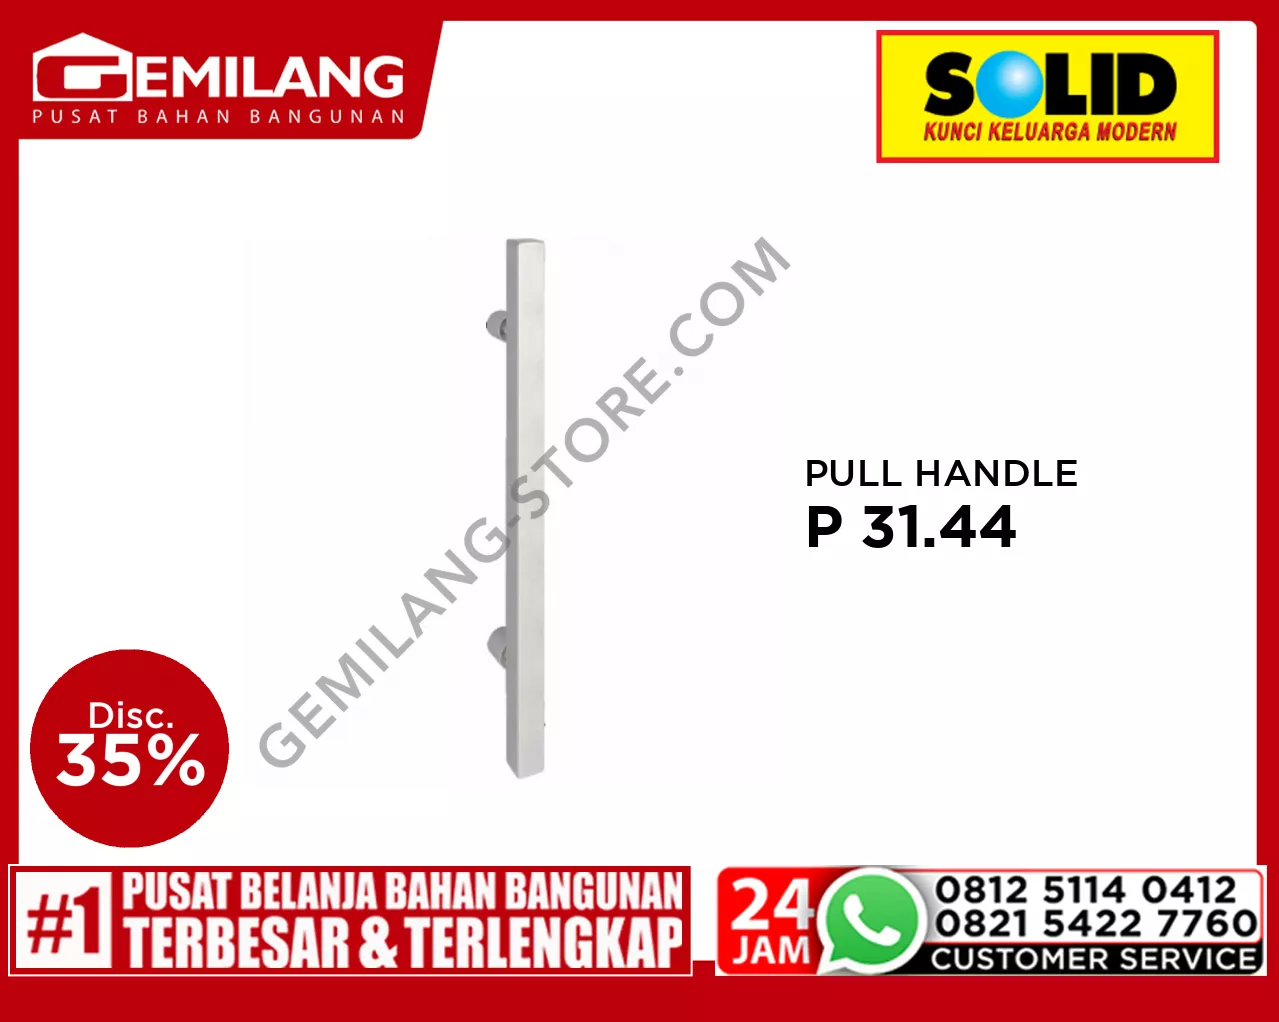 SOLID PULL HANDLE P 31.44 US32D